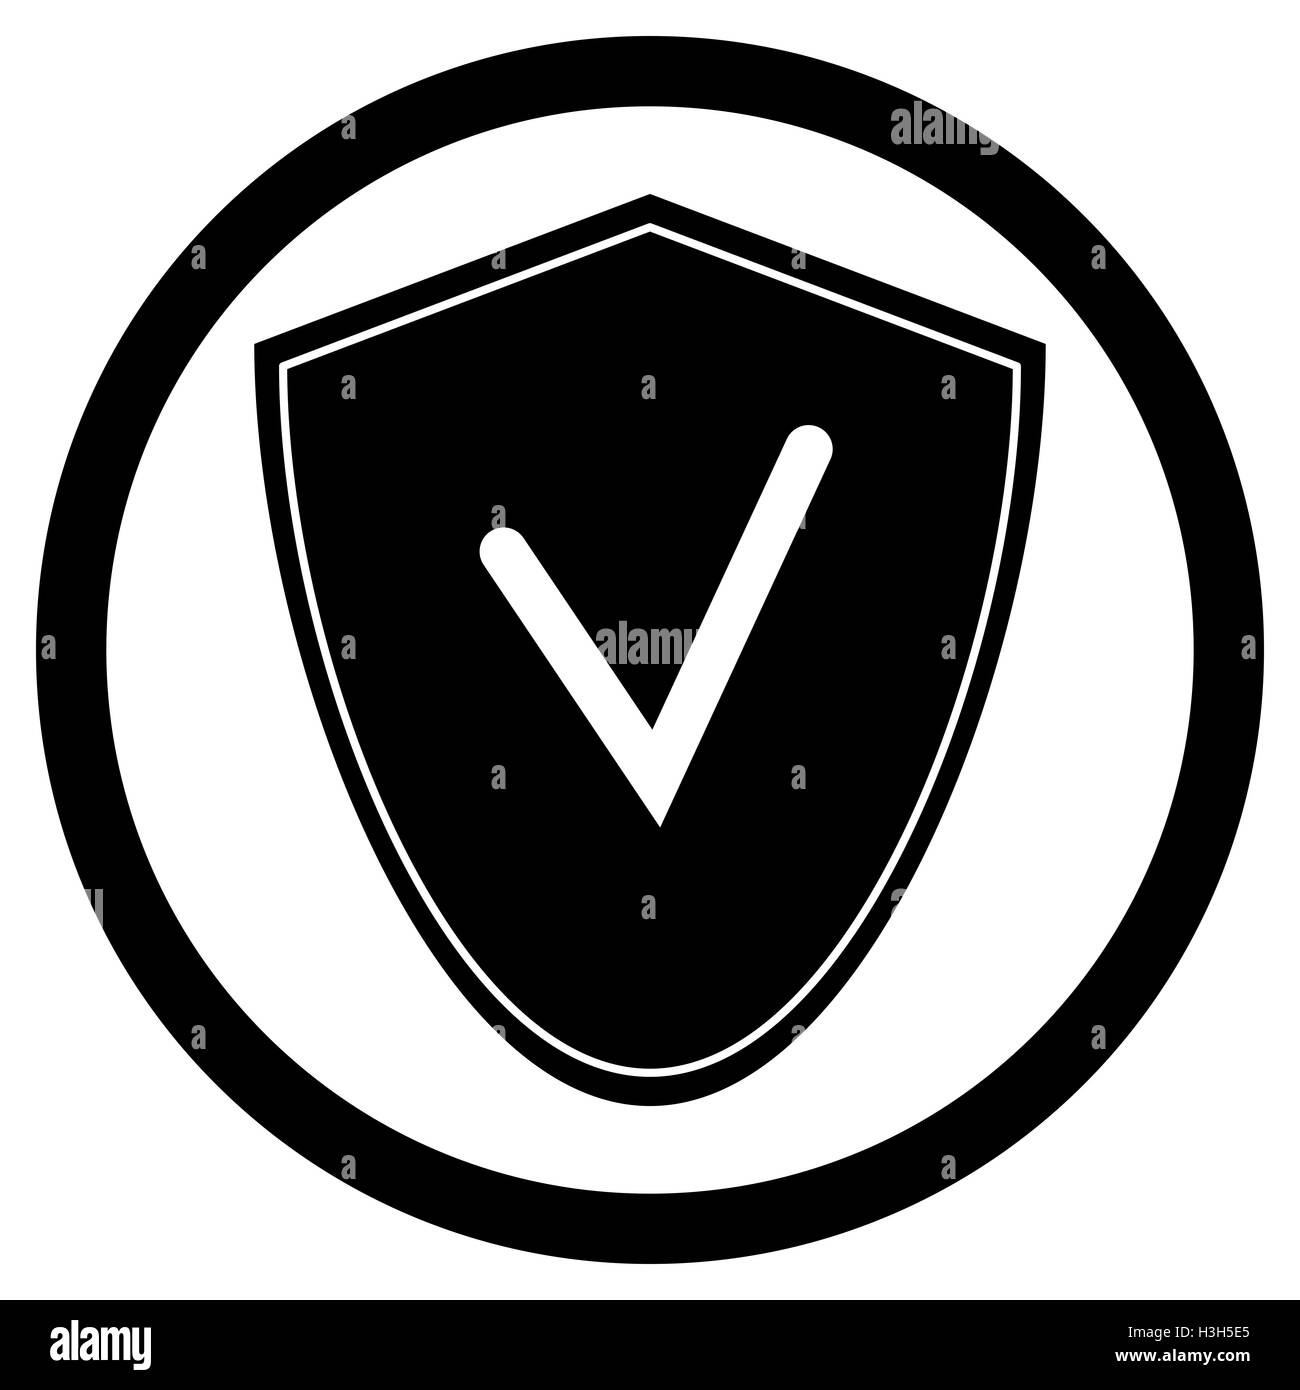 Antivirus icon shield. Shield logo and security icon, protection icons, Vector illustration Stock Photo